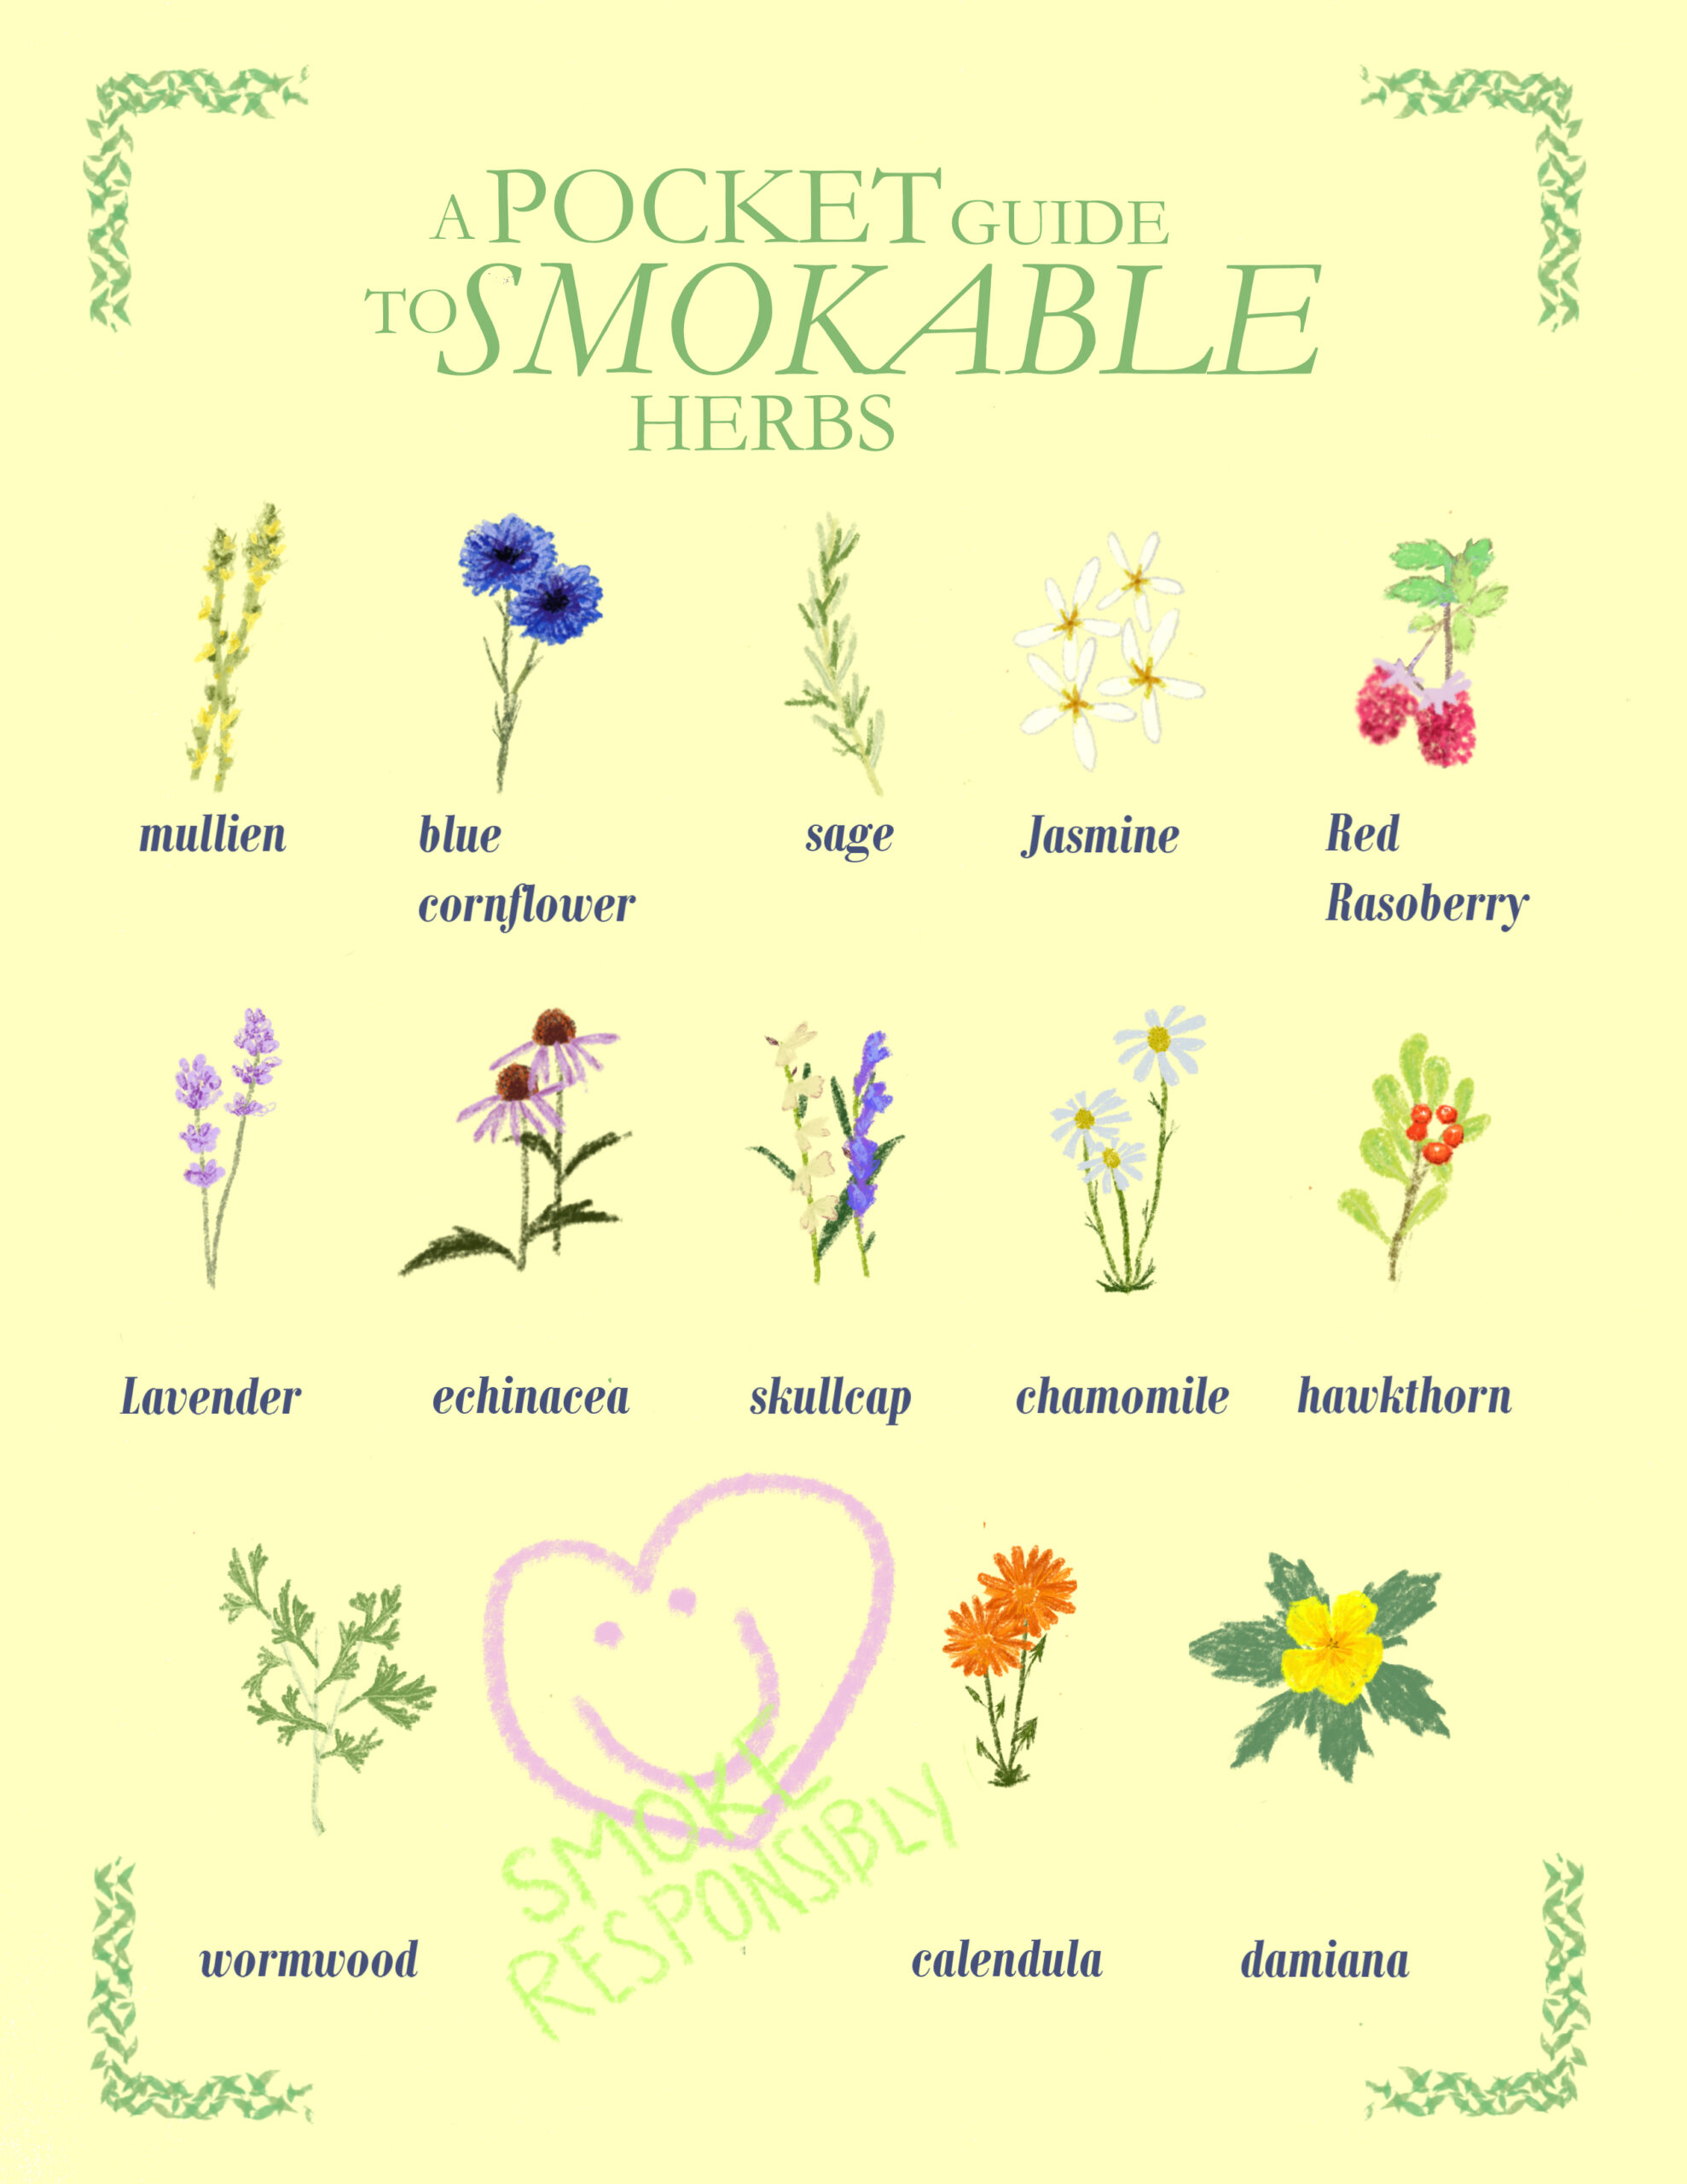 A Pocket Guide to Smokable Herbs - Charged Magazine